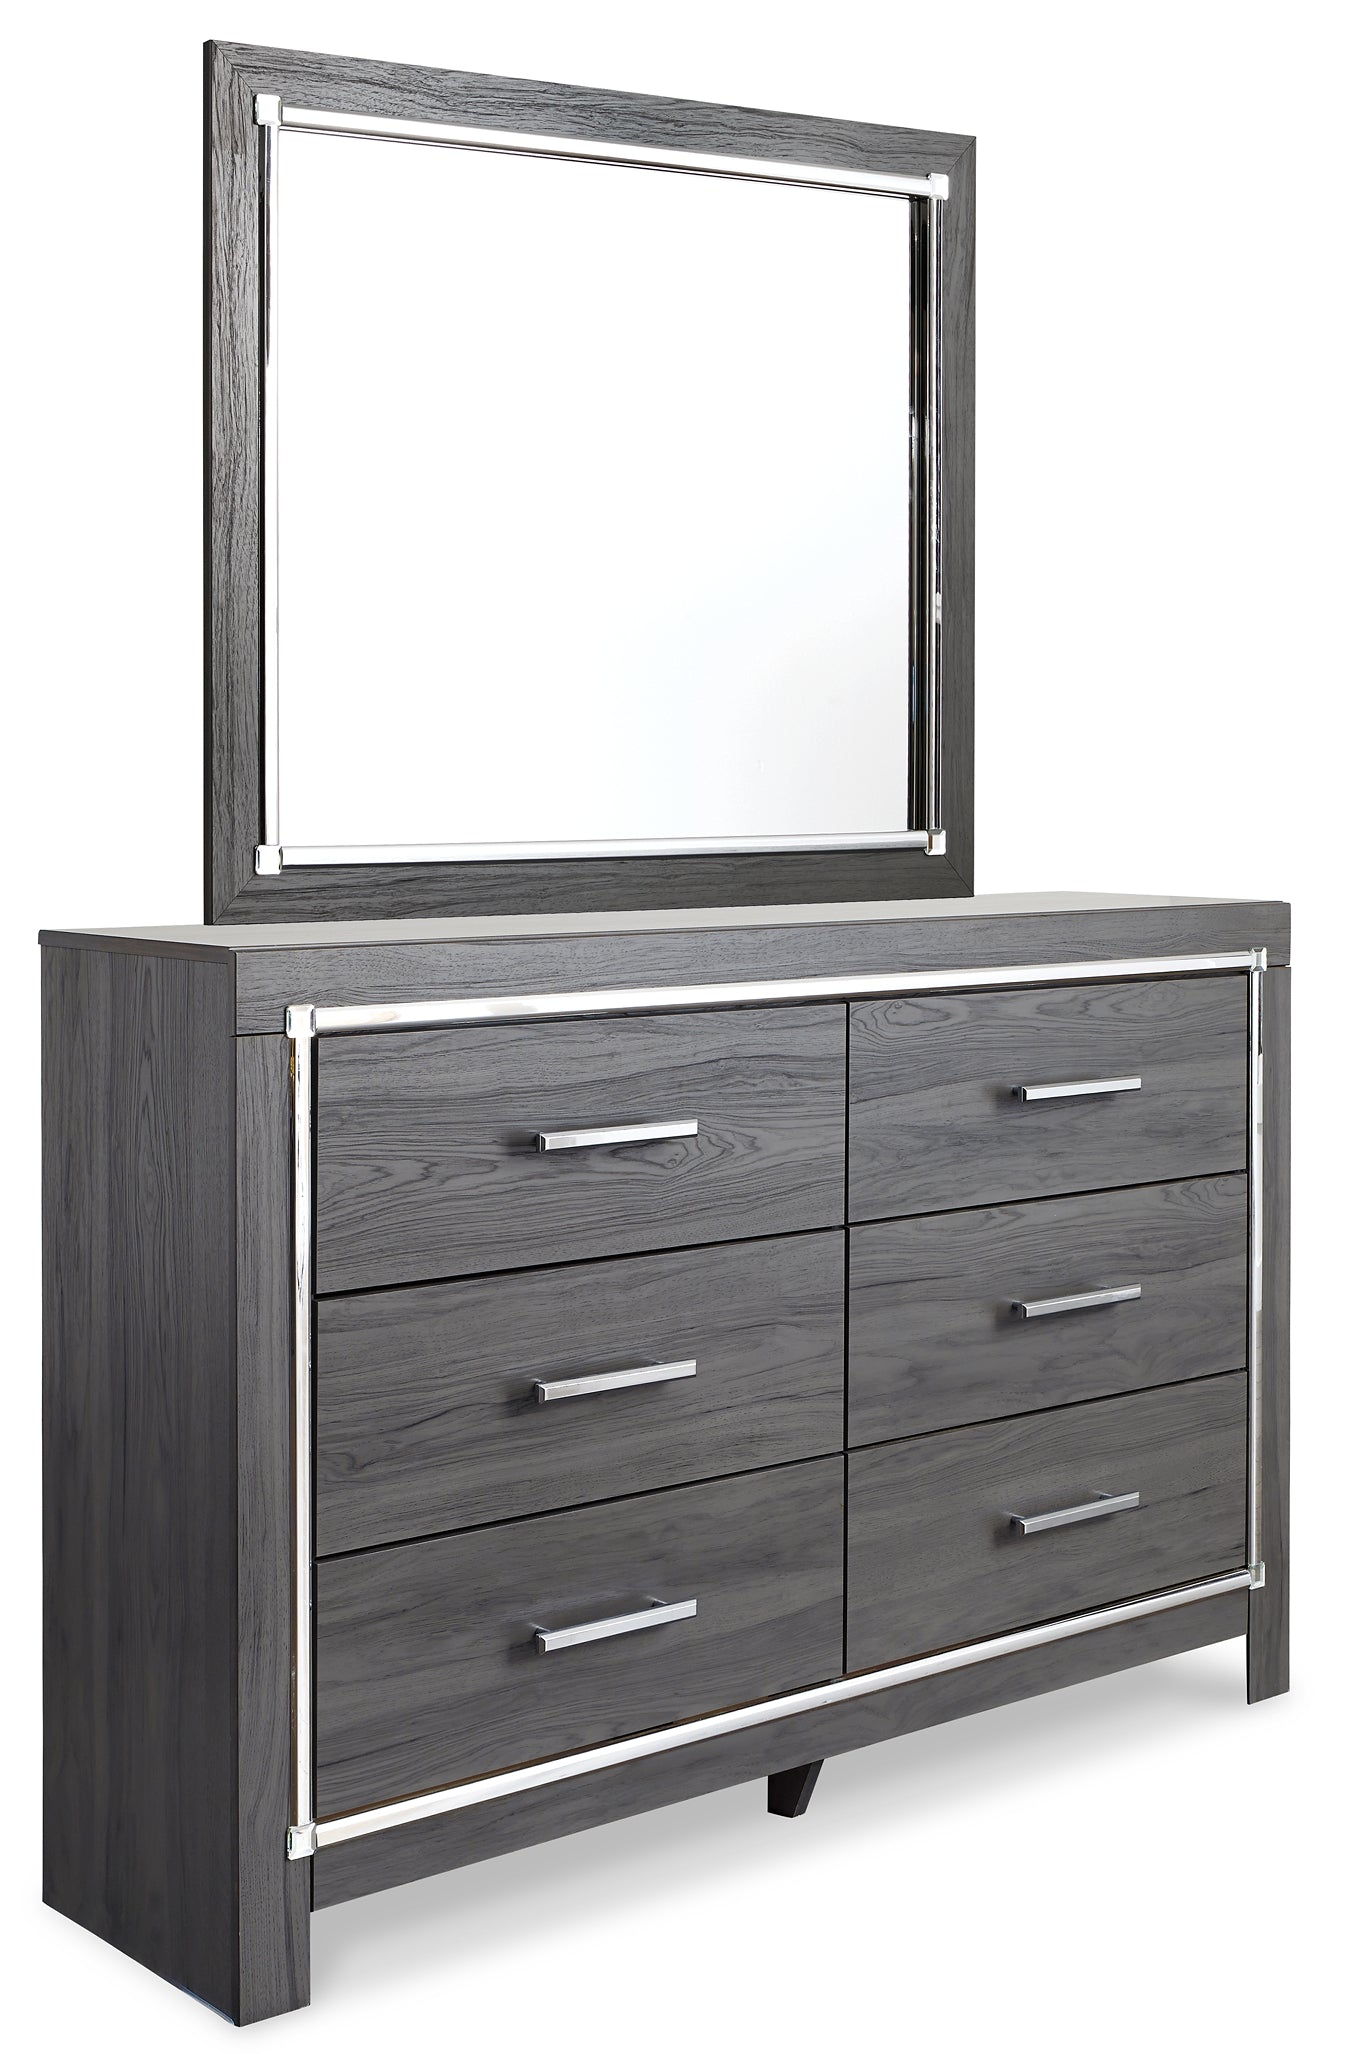 Lodanna Queen Panel Bed with 2 Storage Drawers with Mirrored Dresser, Chest and 2 Nightstands